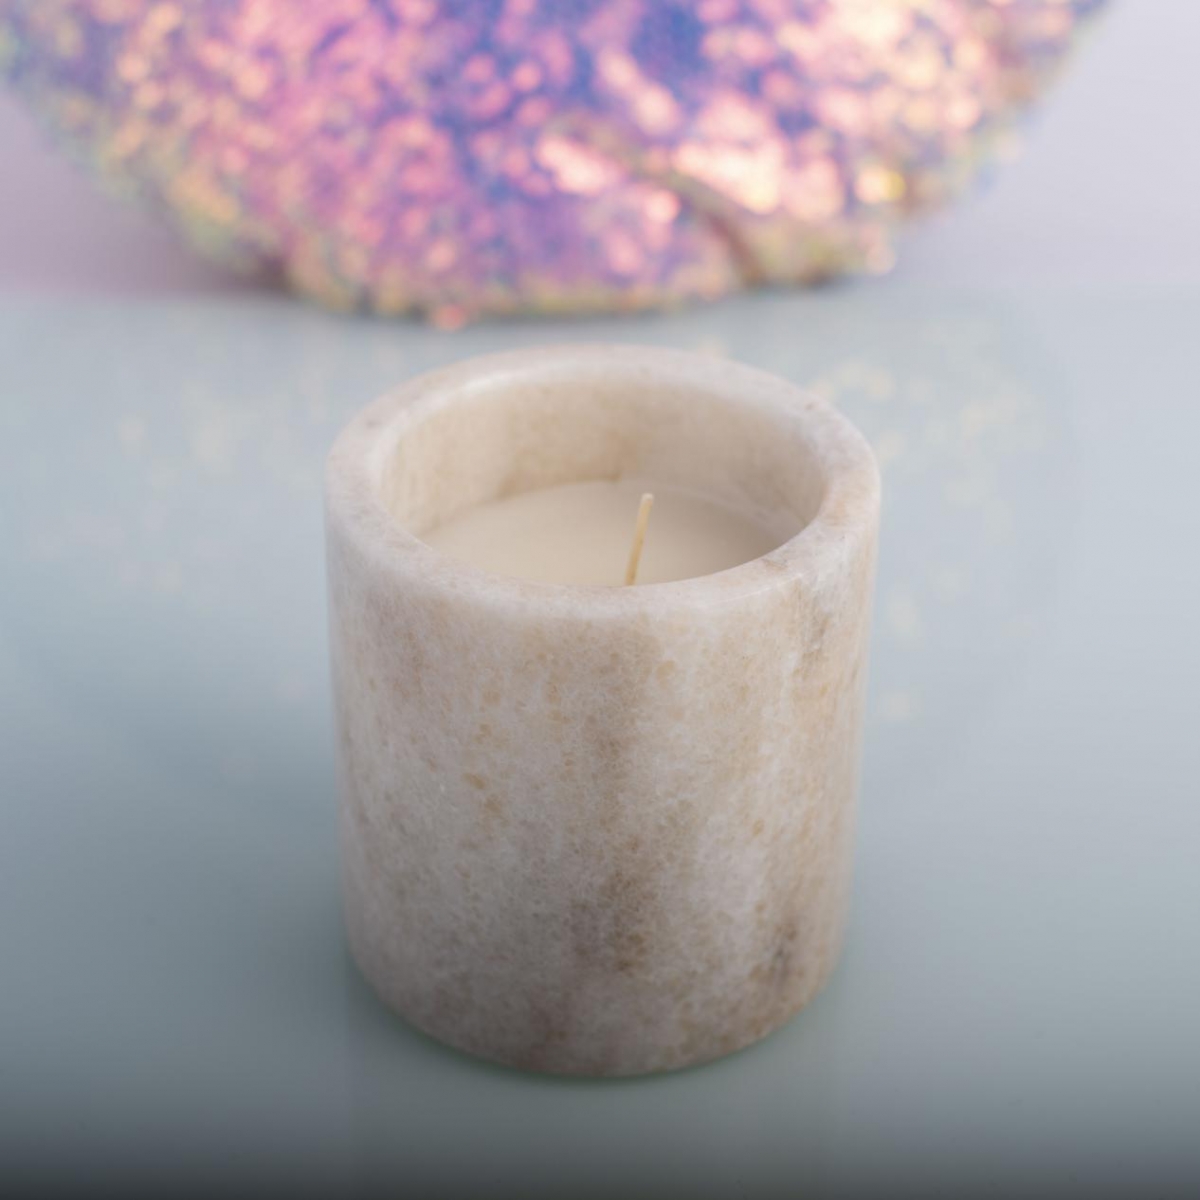 Marble Candles : Luxury Candles, Soy Wax , Essential Oils , China Factory , Cheap Price-HOWCANDLE-Candles,Scented Candles,Aromatherapy Candles,Soy Candles,Vegan Candles,Jar Candles,Pillar Candles,Candle Gift Sets,Essential Oils,Reed Diffuser,Candle Holder,